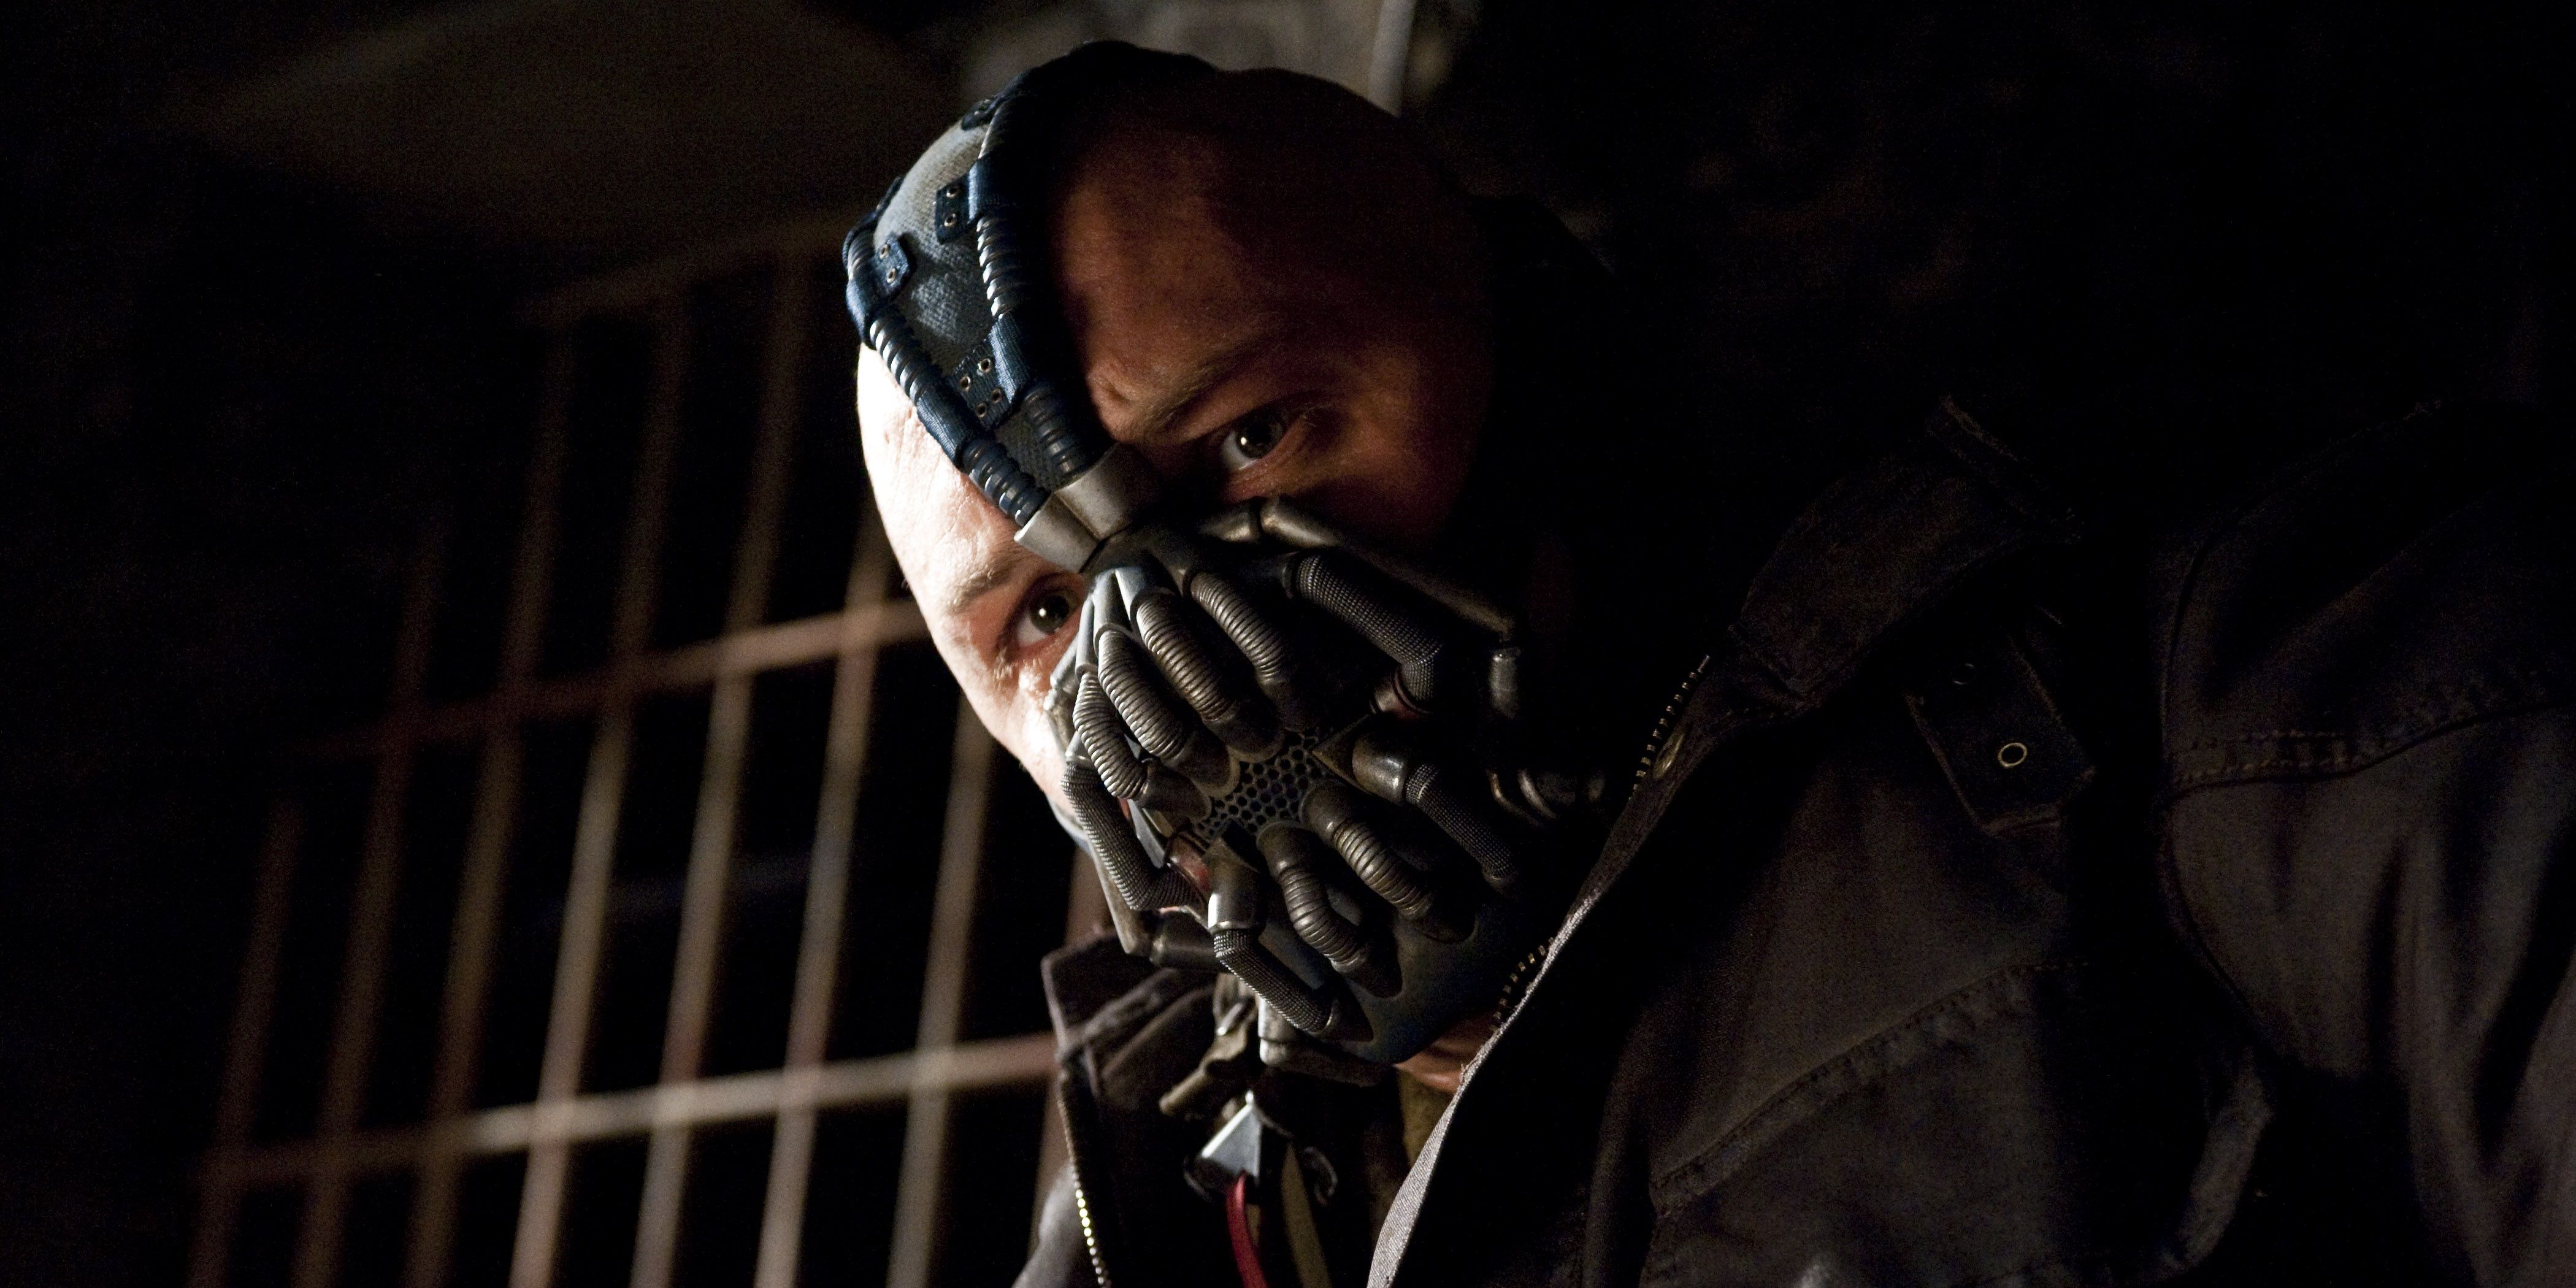 Tom Hardy as Bane in The Dark Knight Rises